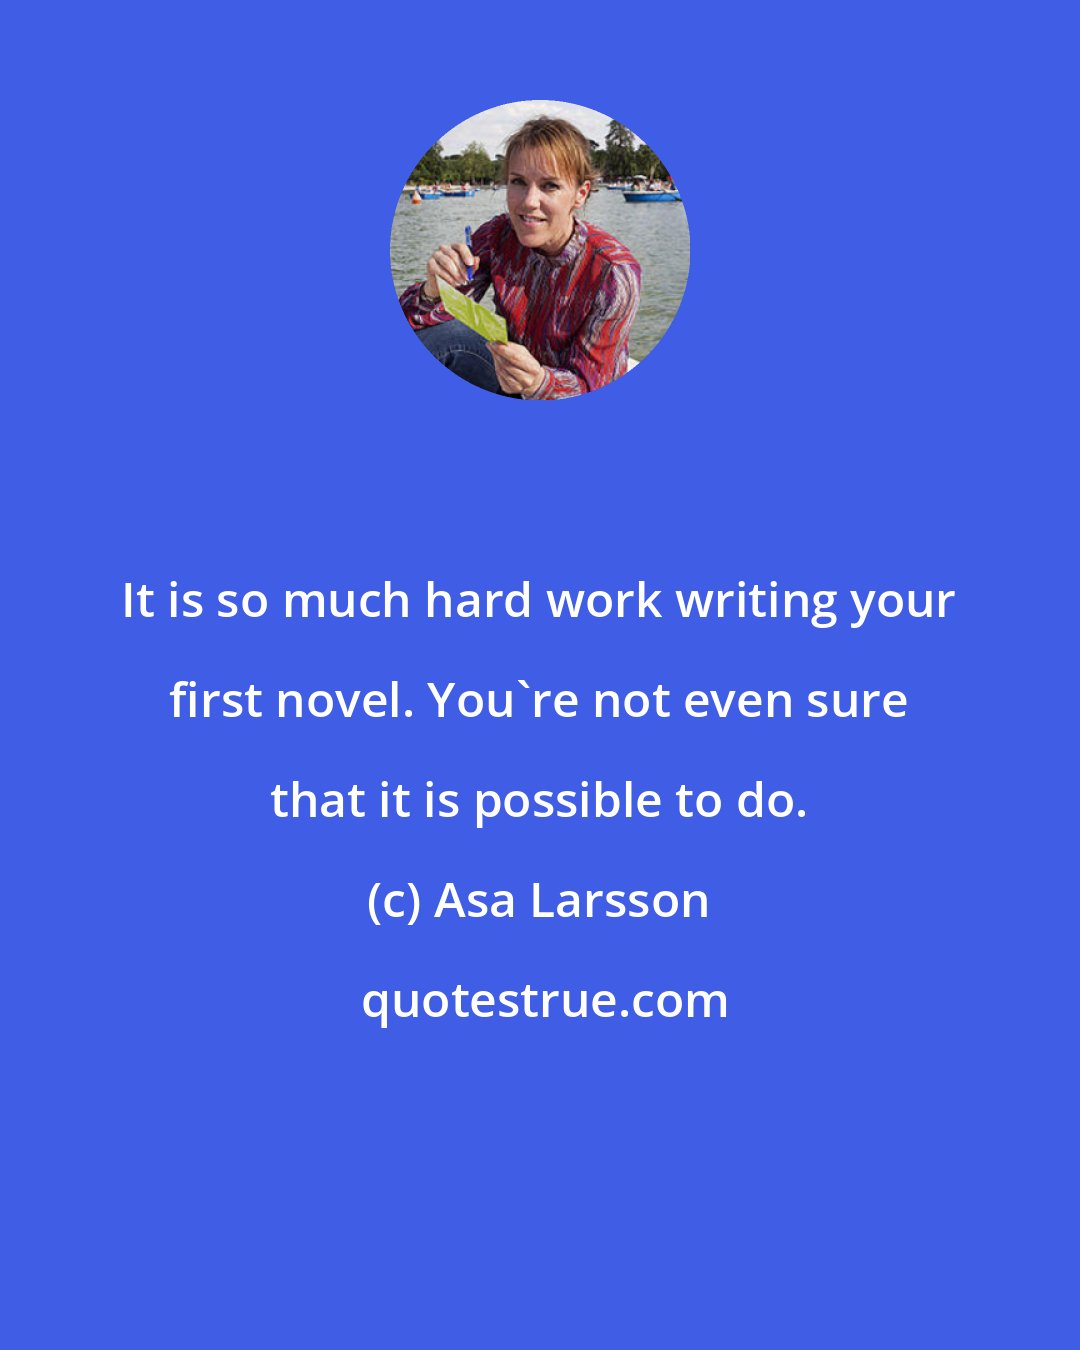 Asa Larsson: It is so much hard work writing your first novel. You're not even sure that it is possible to do.